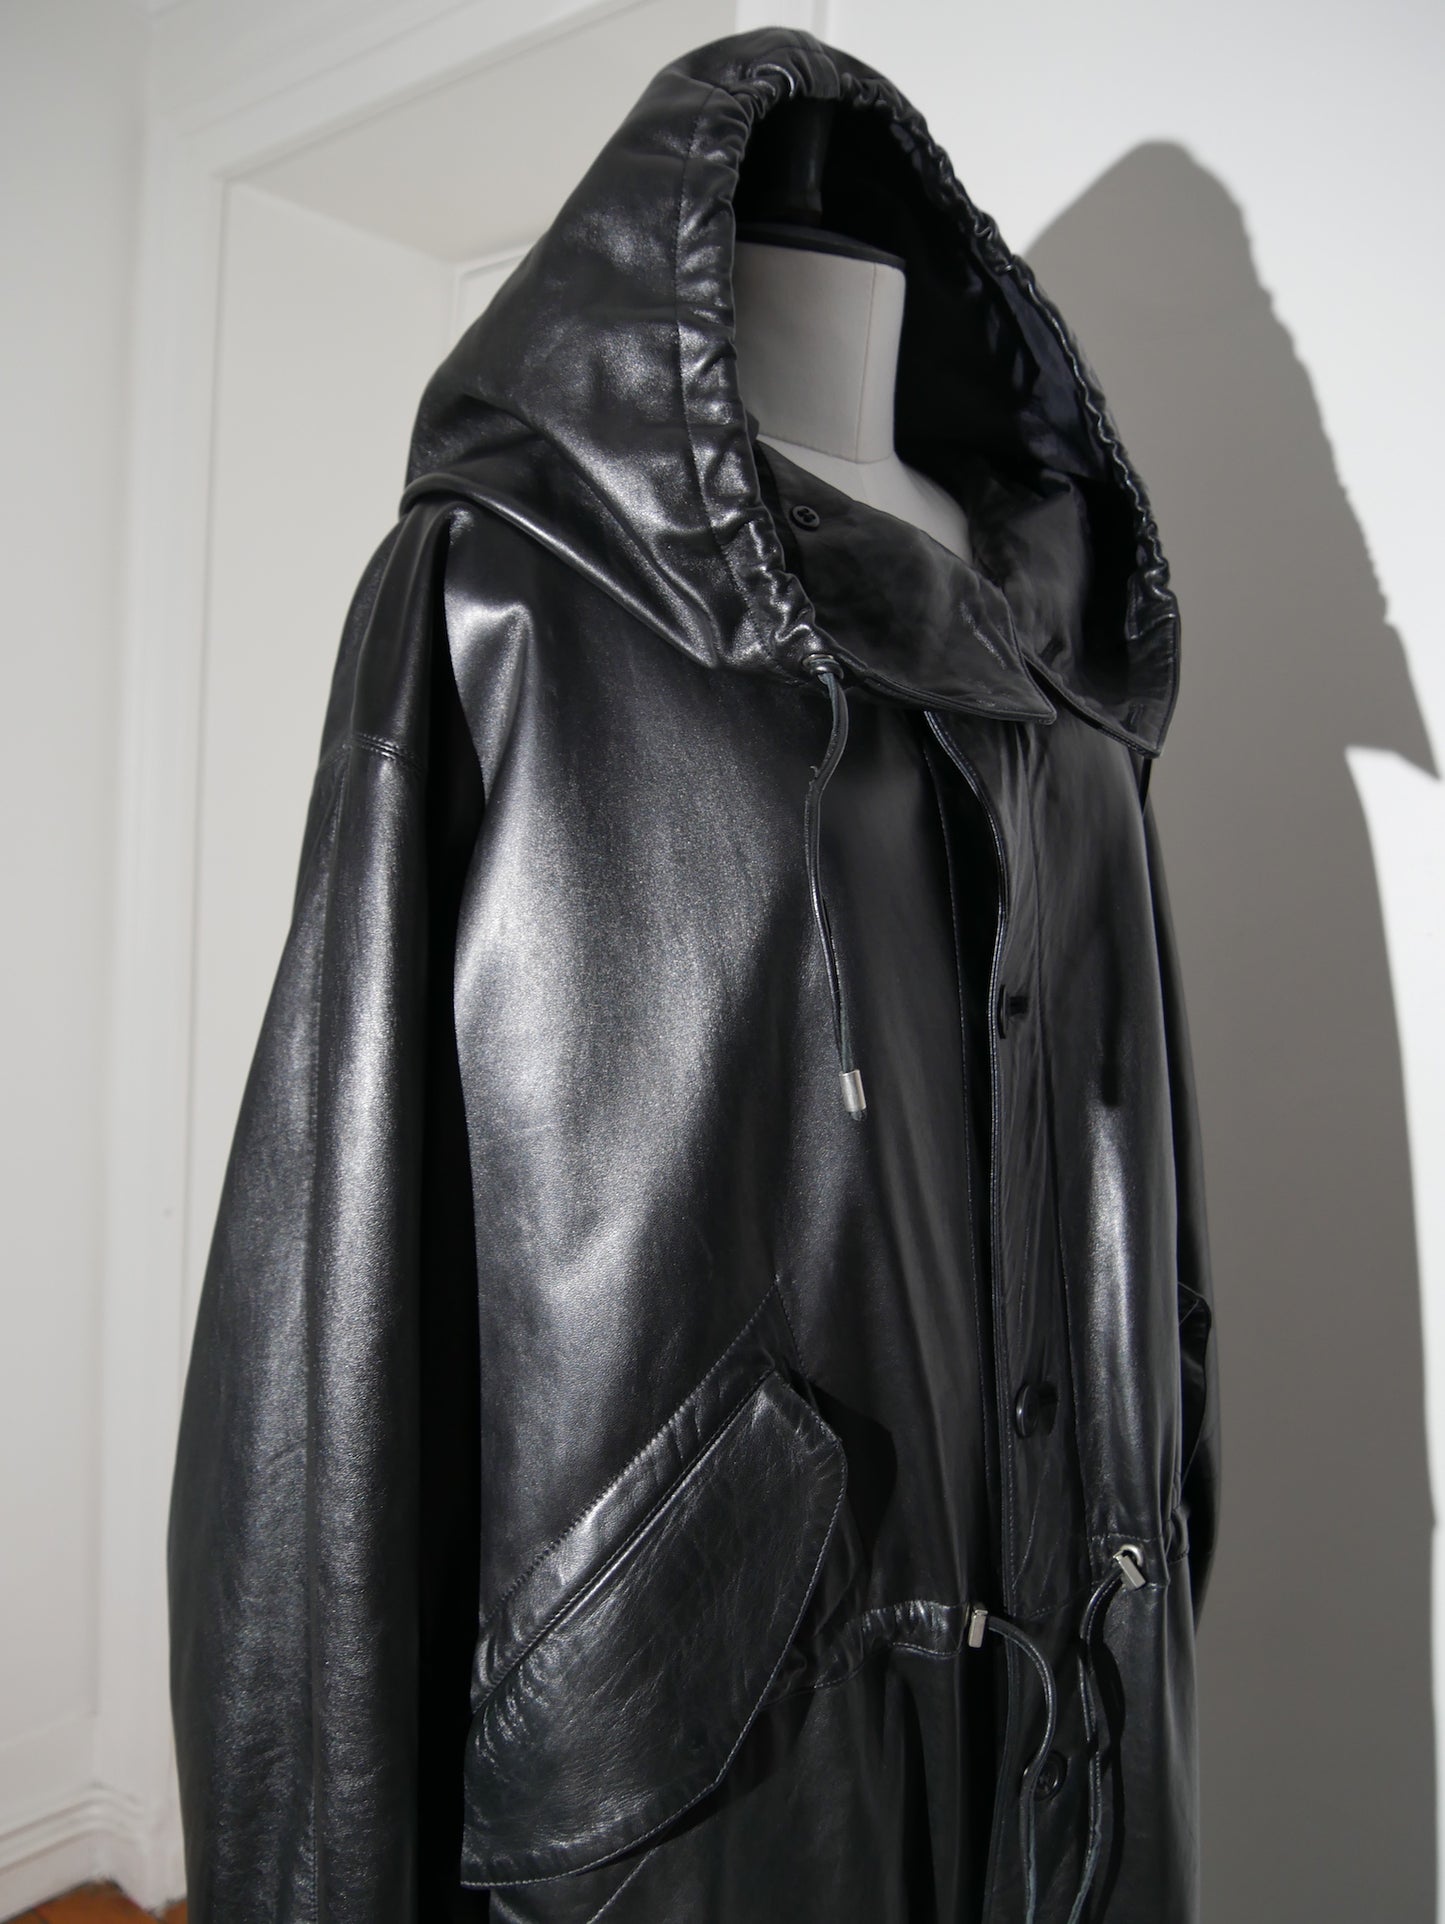 Versace - Gianni Versace - 80's Black Leather Long Hooded Coat